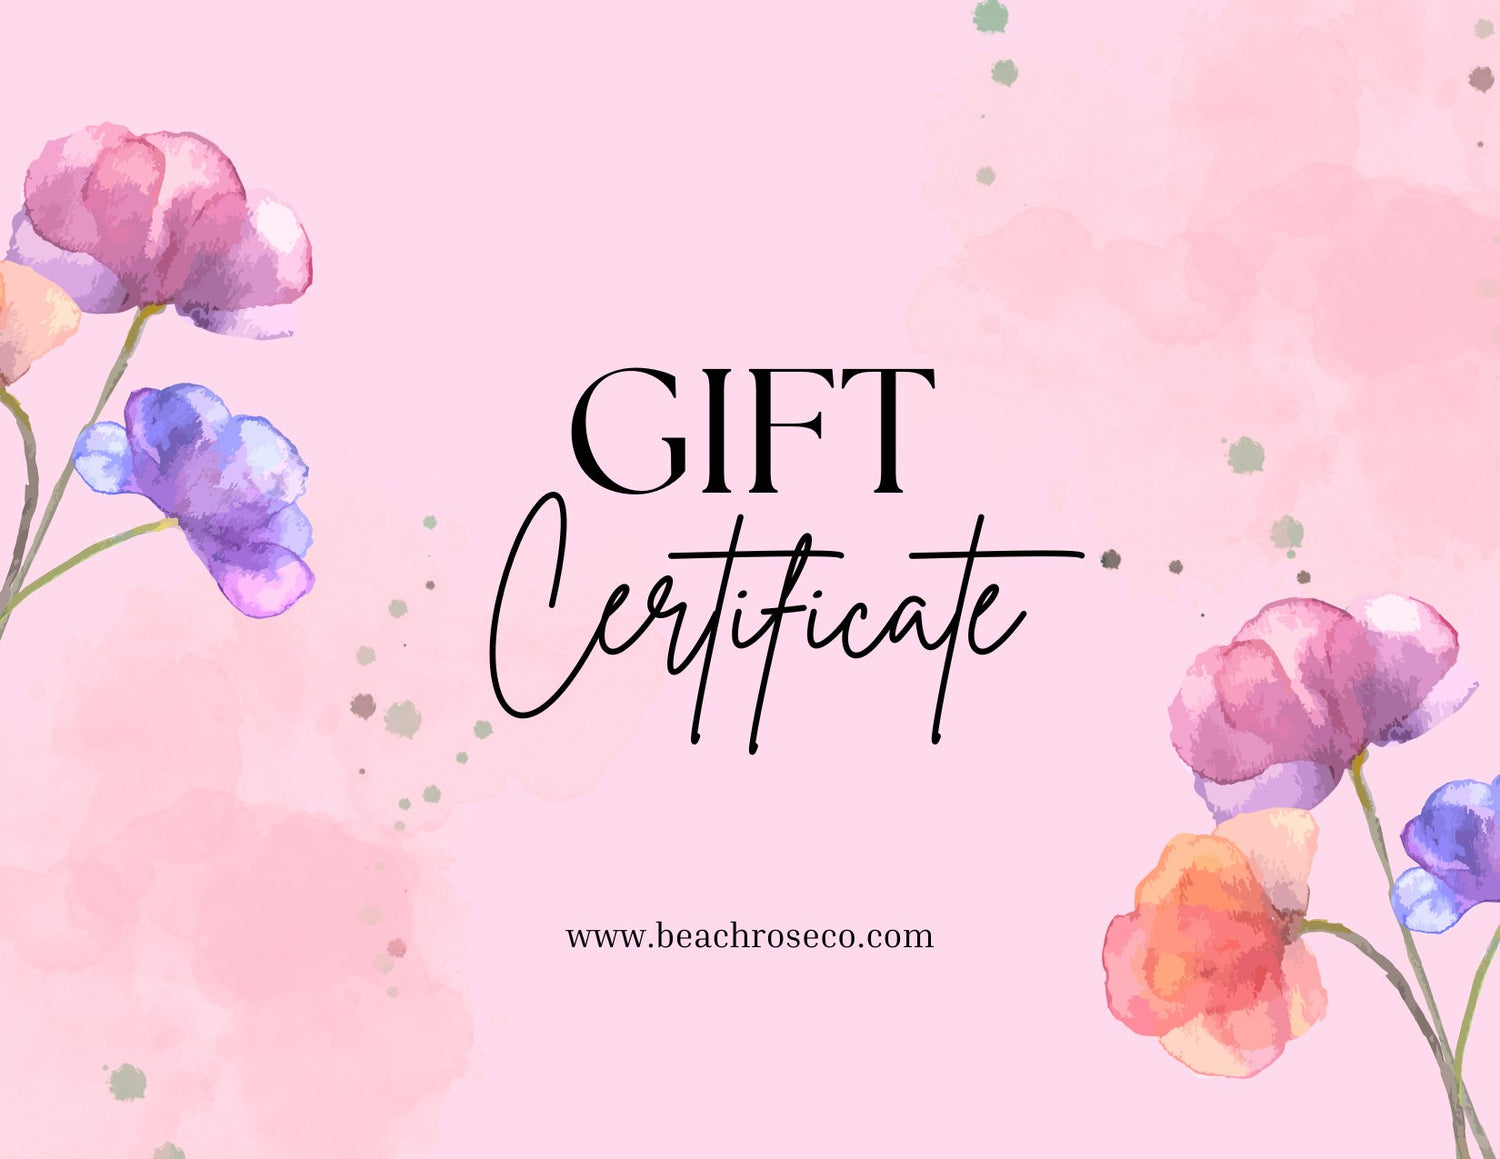 Gift Cards - Beach Rose Co.